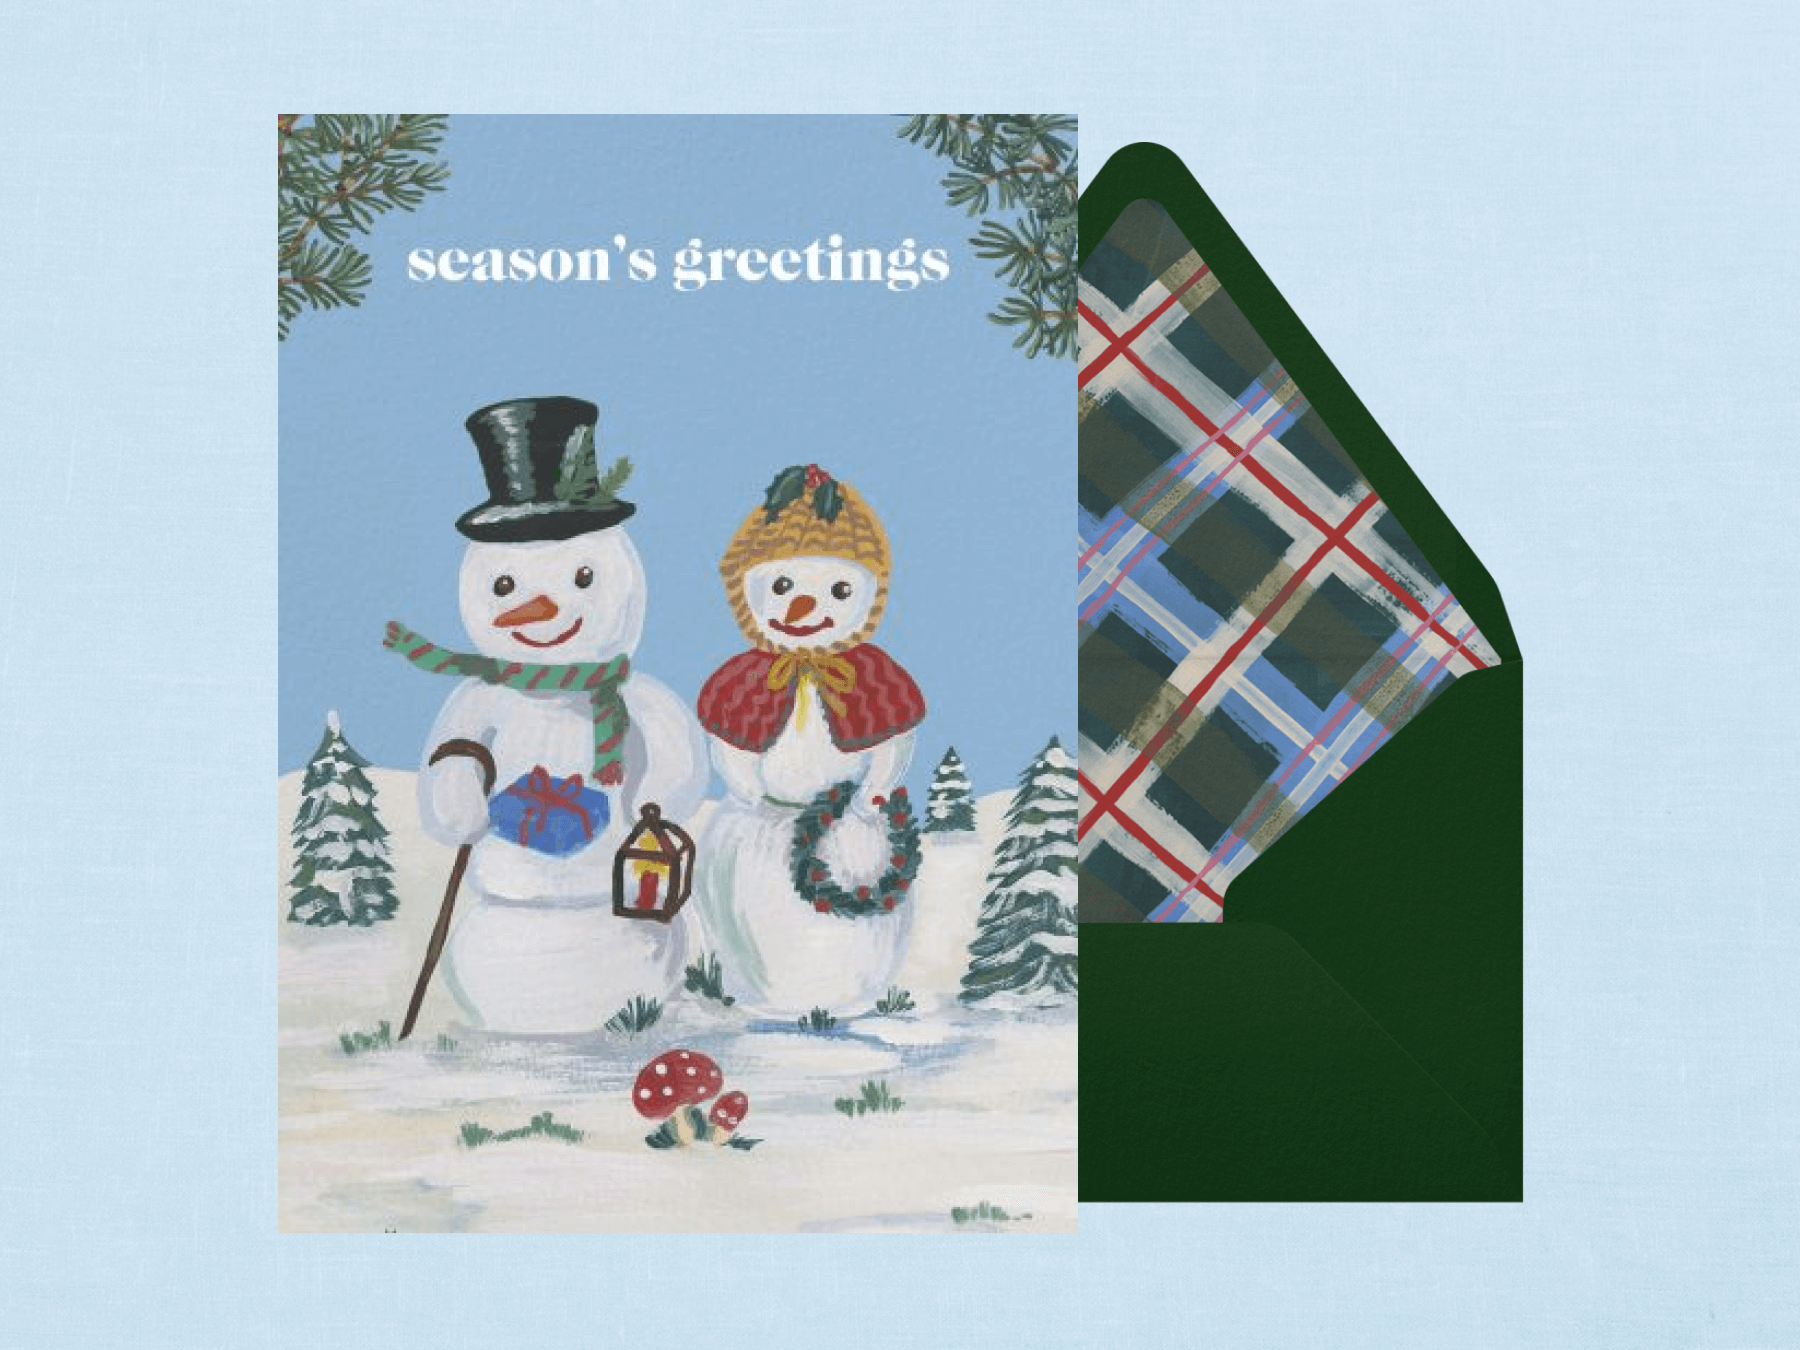 A holiday card with a painting of two snow people wearing winter hats and scarves.